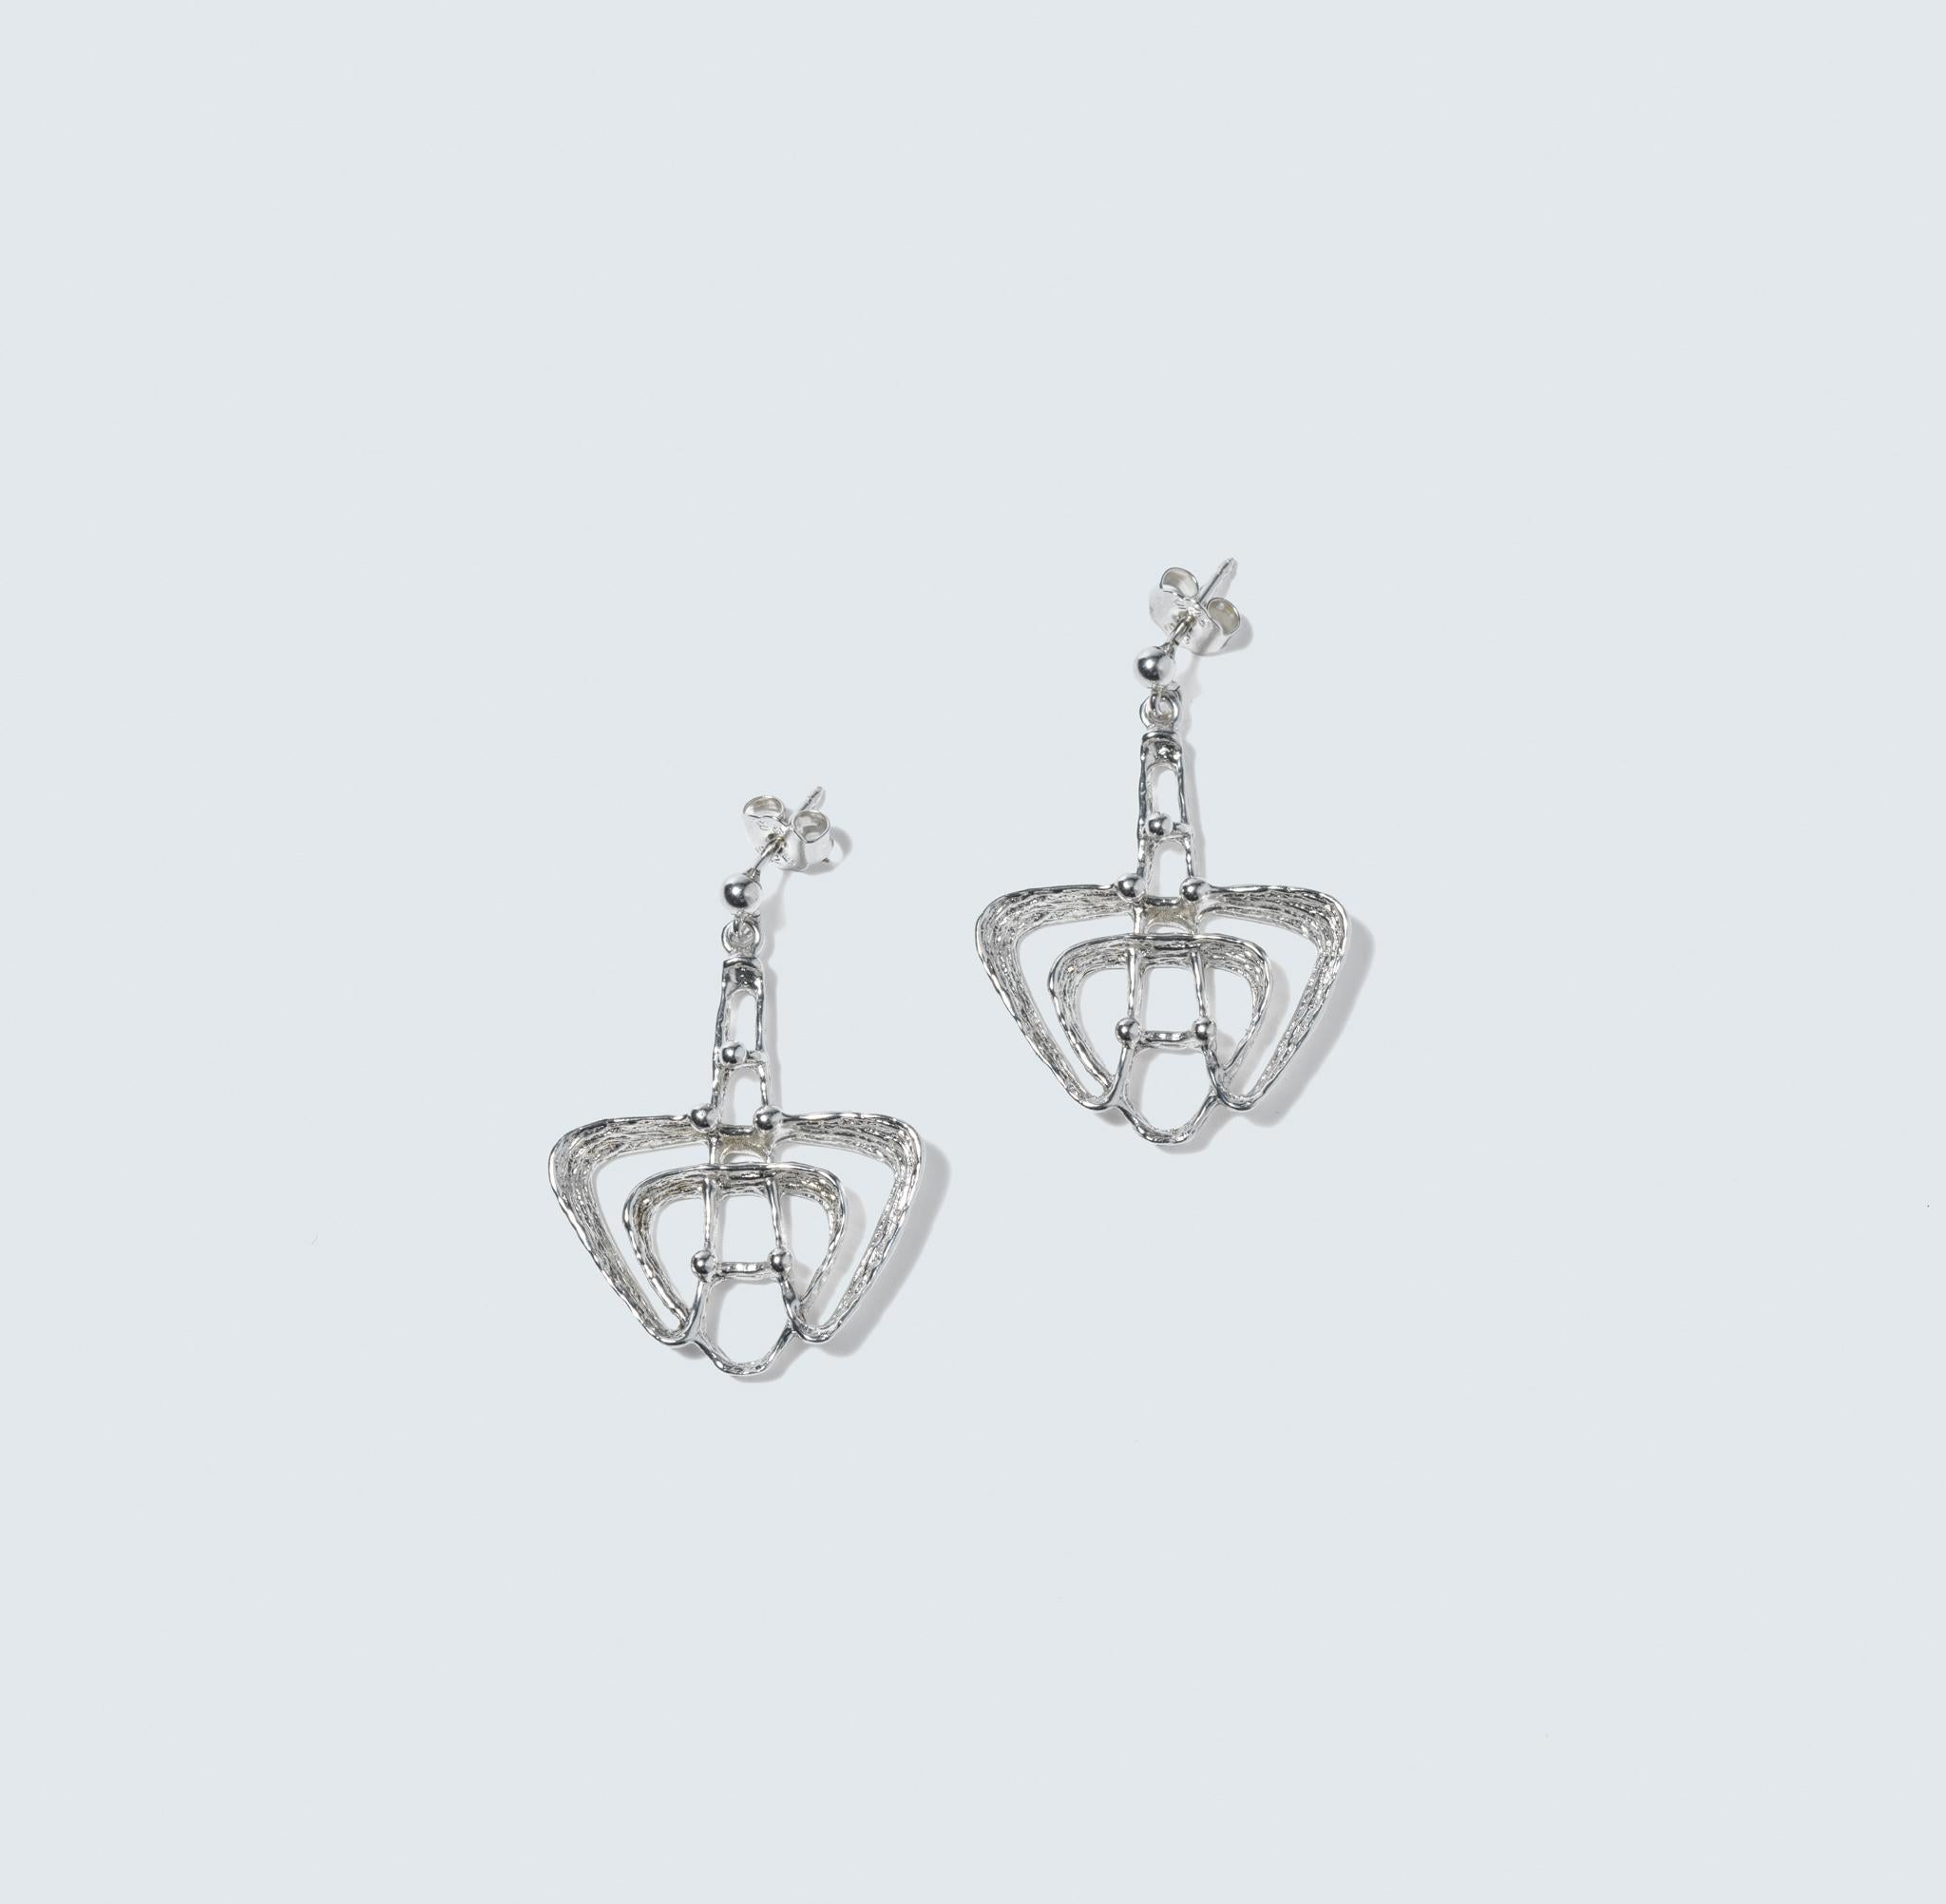 These are sterling silver dangling earrings with a patterned surface finish. The lower part of the earrings forms a triangle with sizeable, hollowed-out spaces, giving a modern geometric look. Above the triangles, the earrings feature a chain of